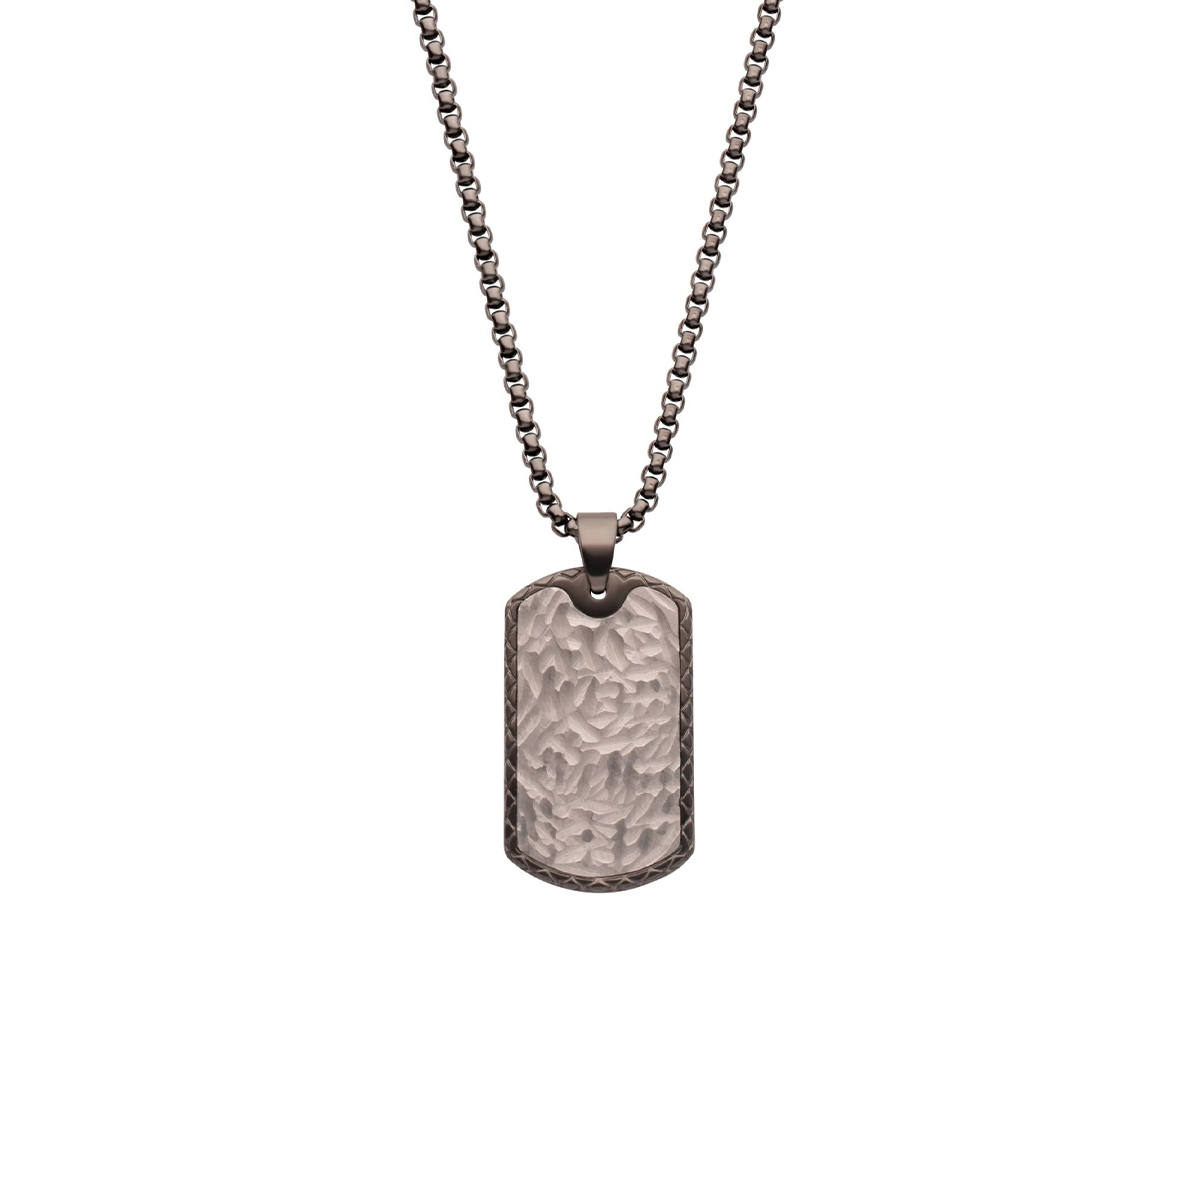 Stainless Steel Dogtag Pendant And Chain.